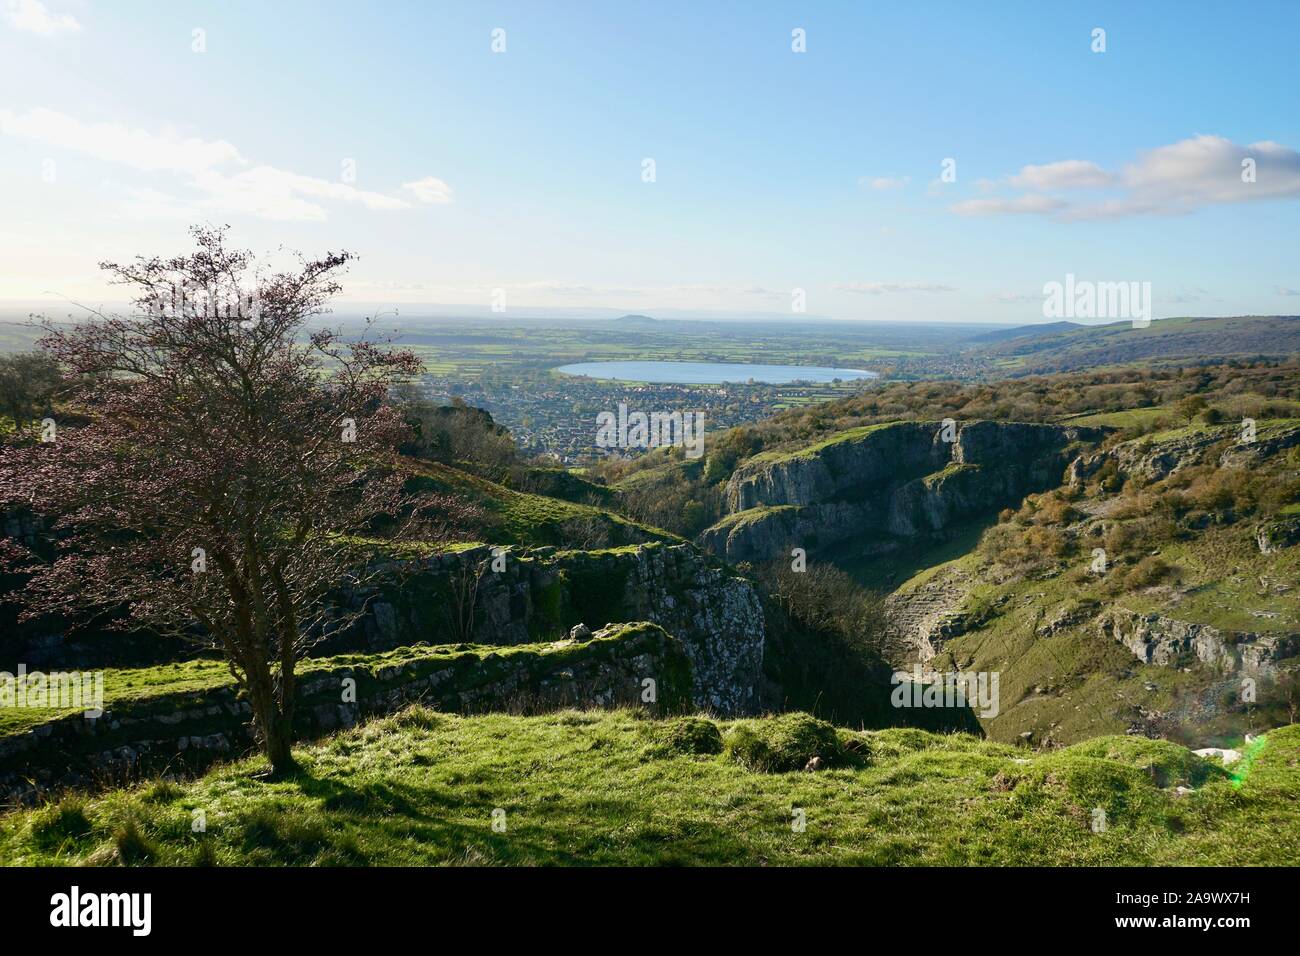 View from the top of the east cliff of Cheddar Gorge, Somerset, England, looking towards Cheddar Reservoir Stock Photo